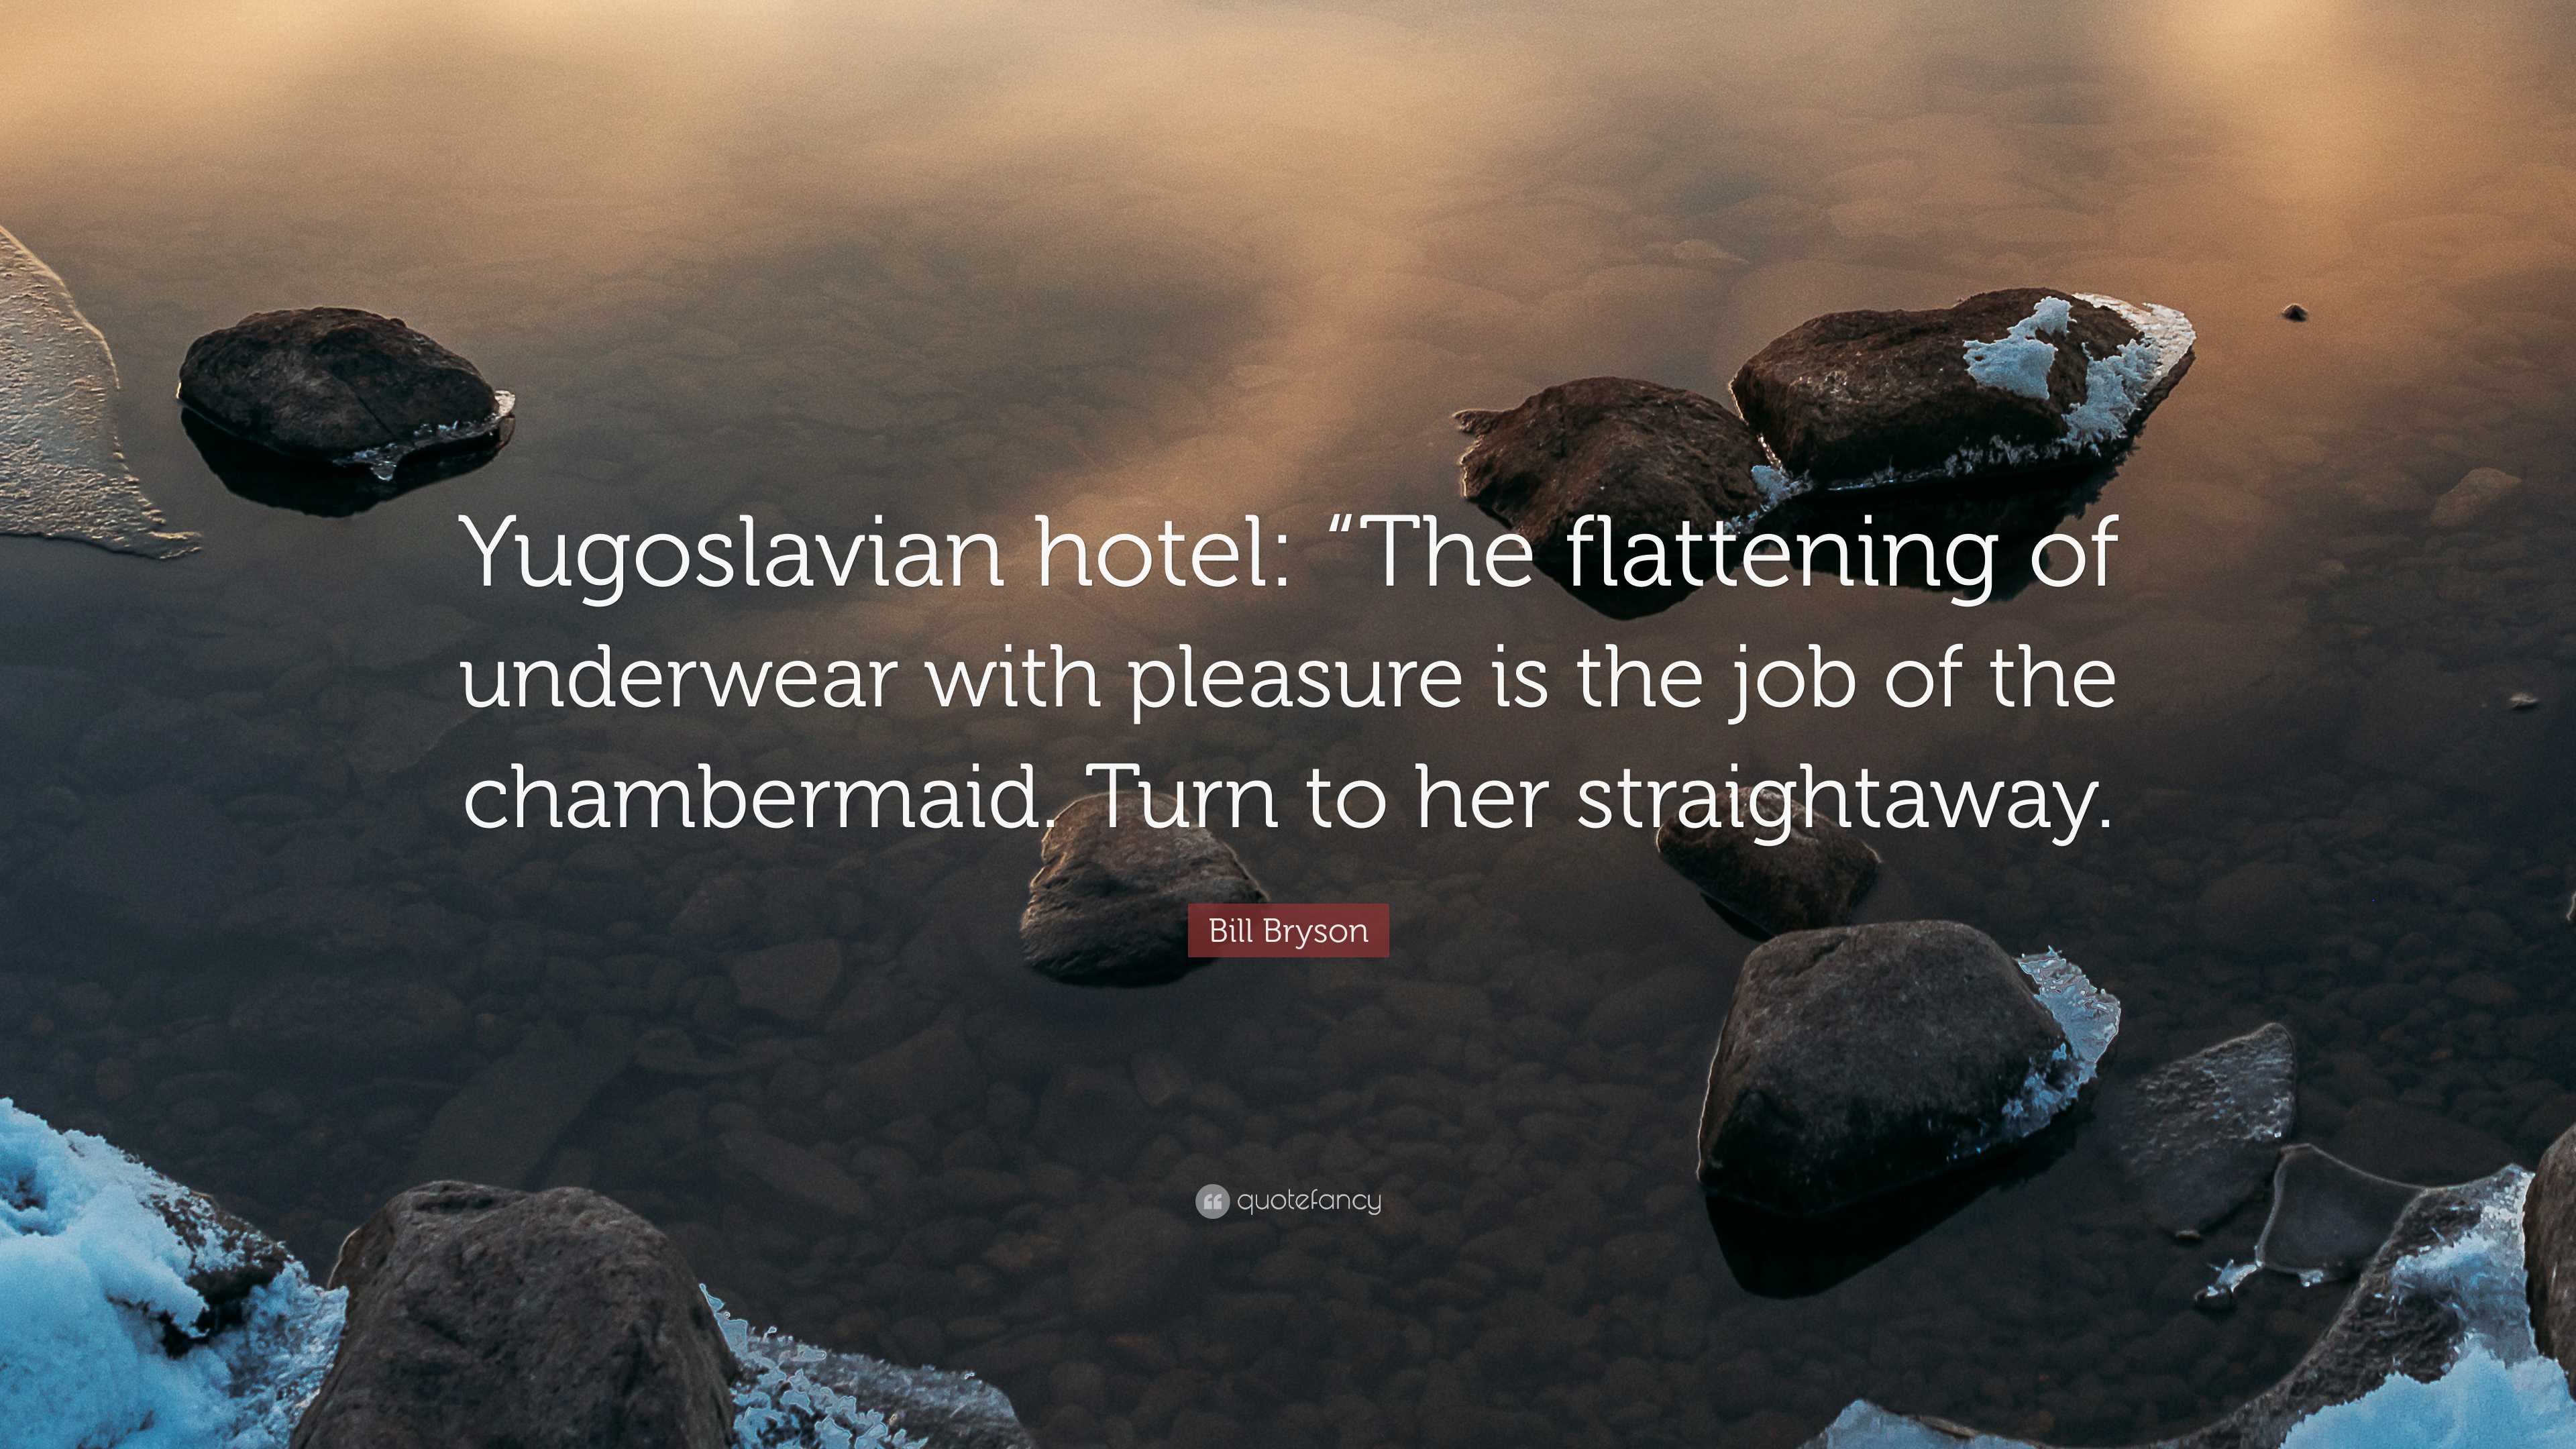 Bill Bryson Quote: “Yugoslavian hotel: “The flattening of underwear with  pleasure is the job of the